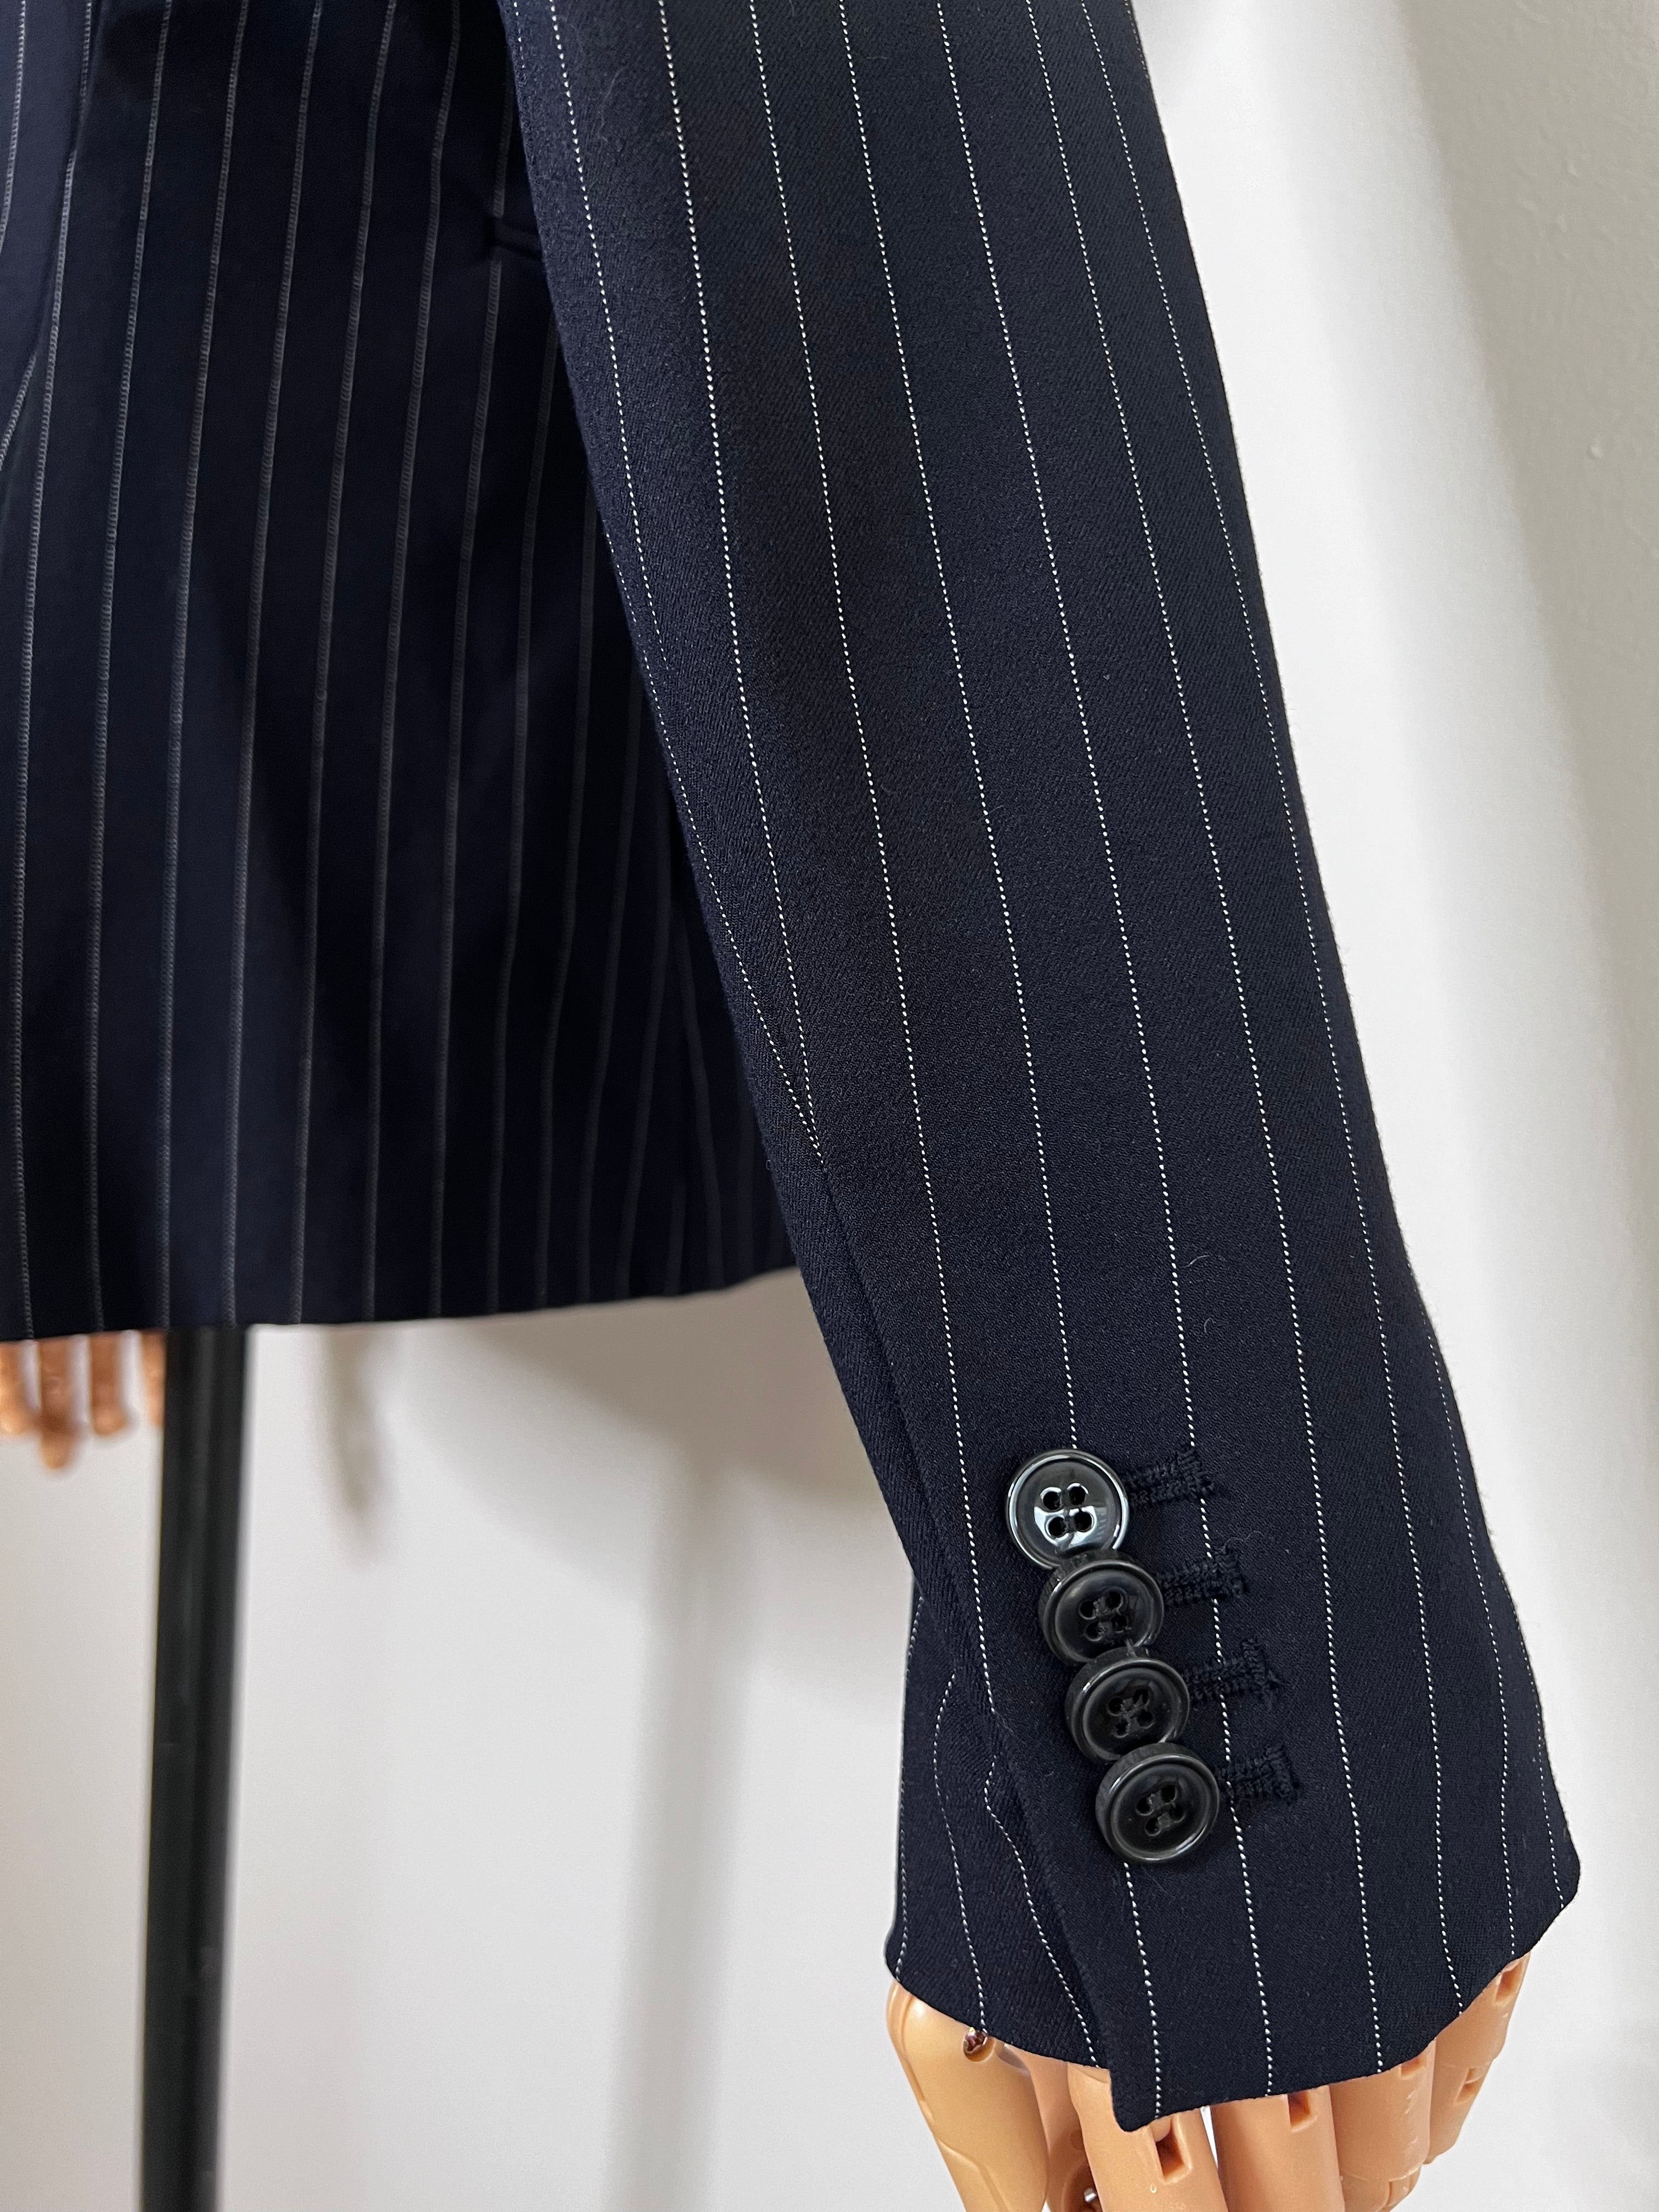 Dark blue pinstriped fitted jacket in a stretch weave with lapel and front hook & welt pockets - H&M